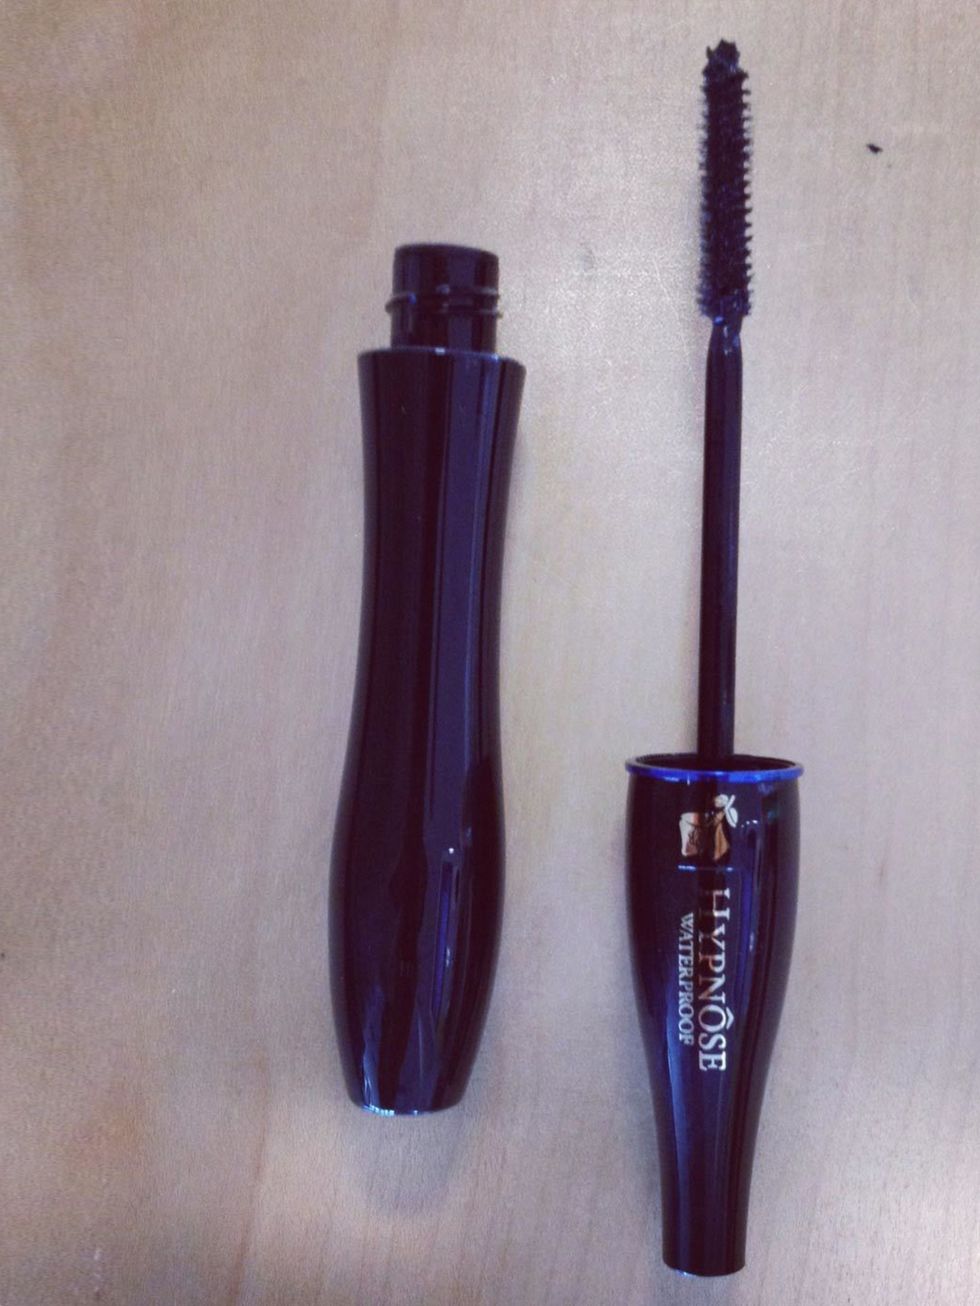 <p><strong>Lancome Hypnose Waterproof Mascara, £20.50, at <a href="http://www.boots.com/en/Lancome-Hypnose-Drama-Waterproof-Mascara_1055609/">Boots</a></strong>Just because you're hitting the beach doesn't mean you have to forgo make up all together. I lo